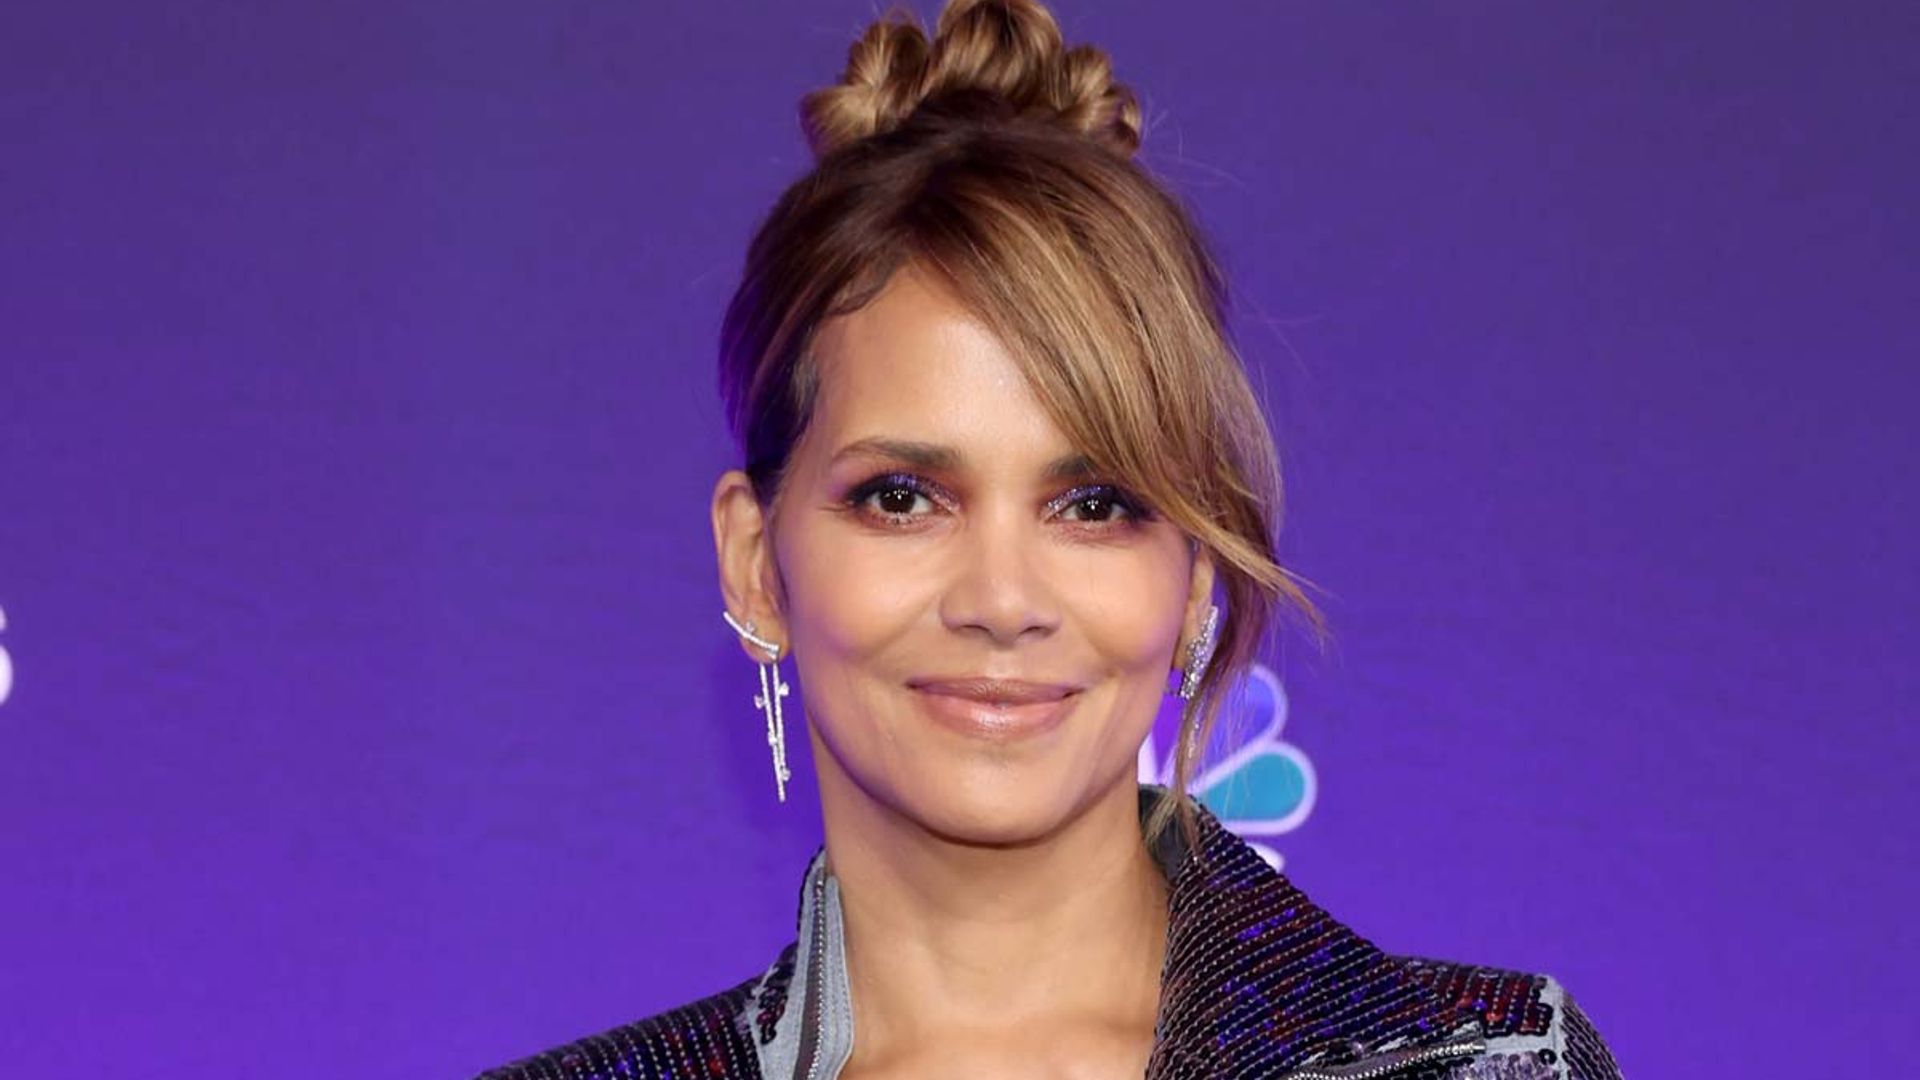 Halle Berry, 56, stuns in slinky lingerie for empowering birthday post